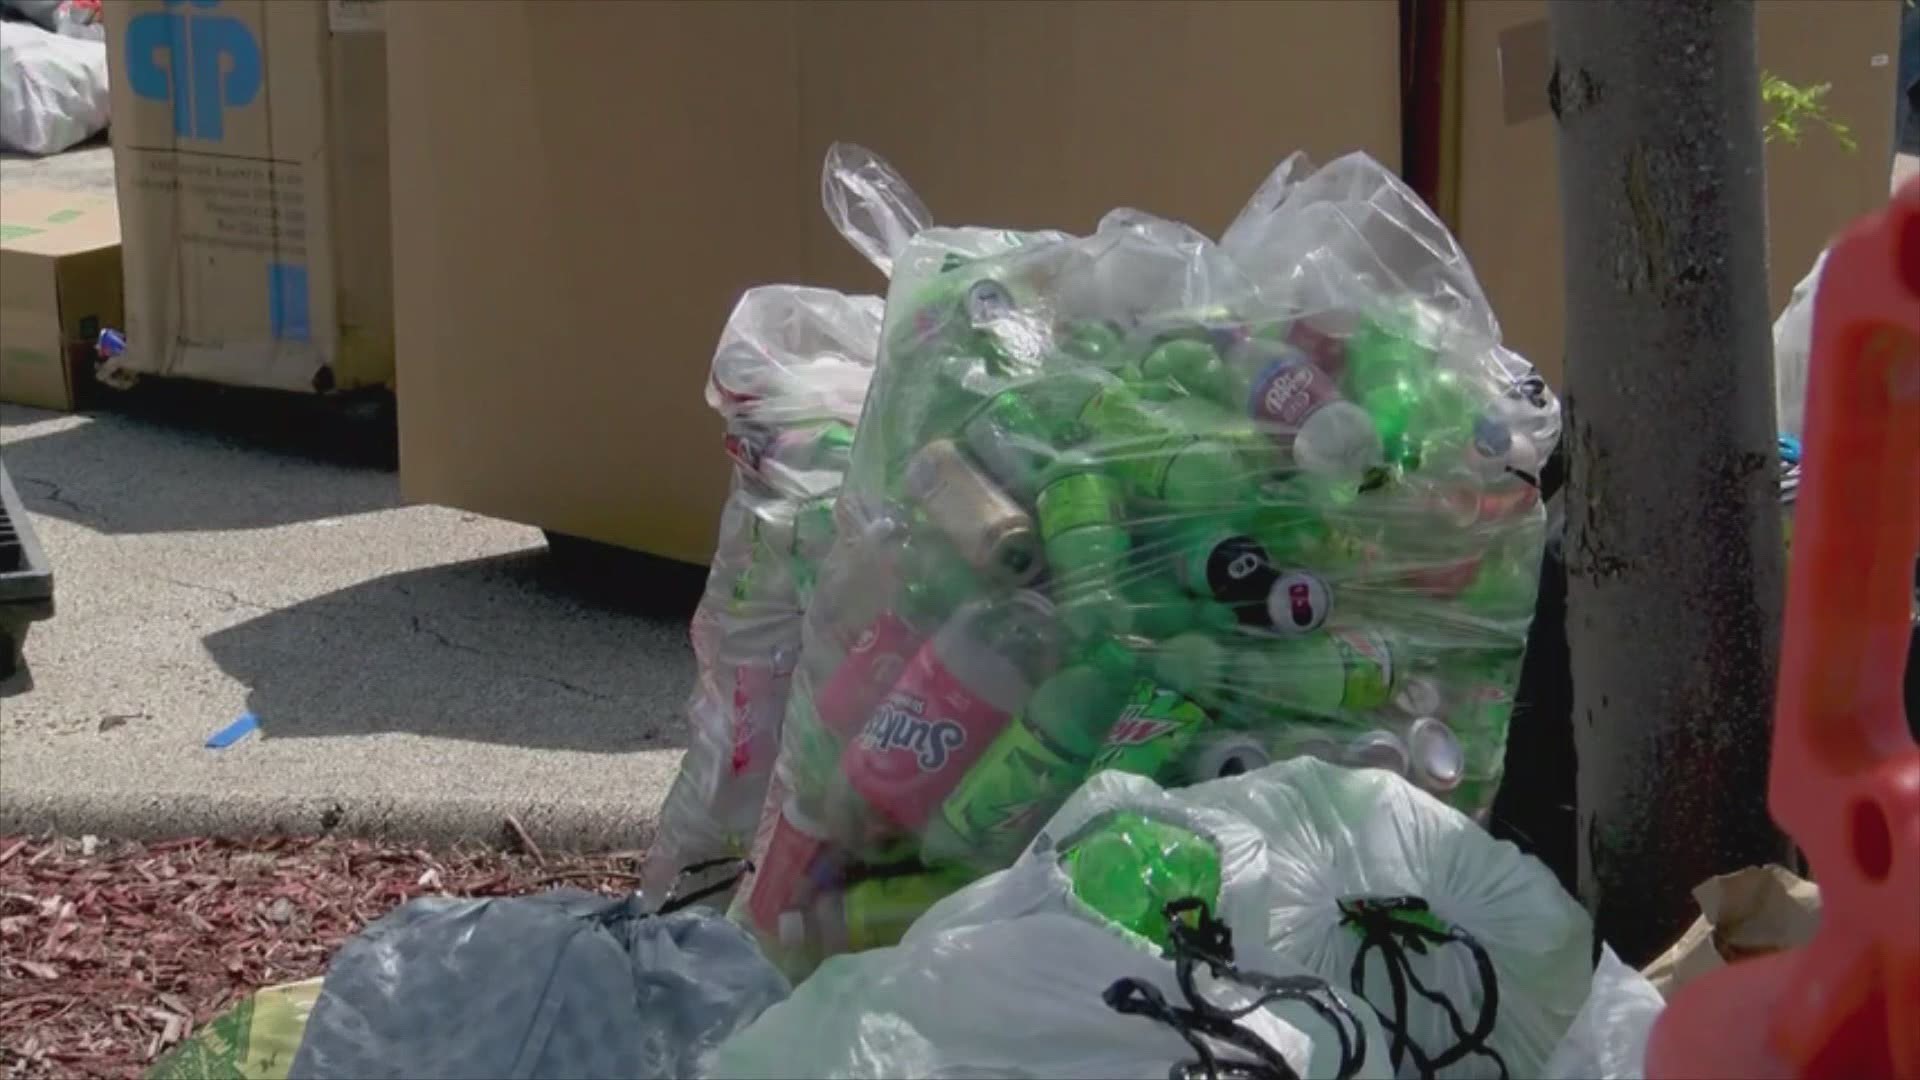 Have a bunch of cans and bottles piling up? Central Iowa Shelter and Services will take and redeem them, with all proceeds going straight to the shelter.